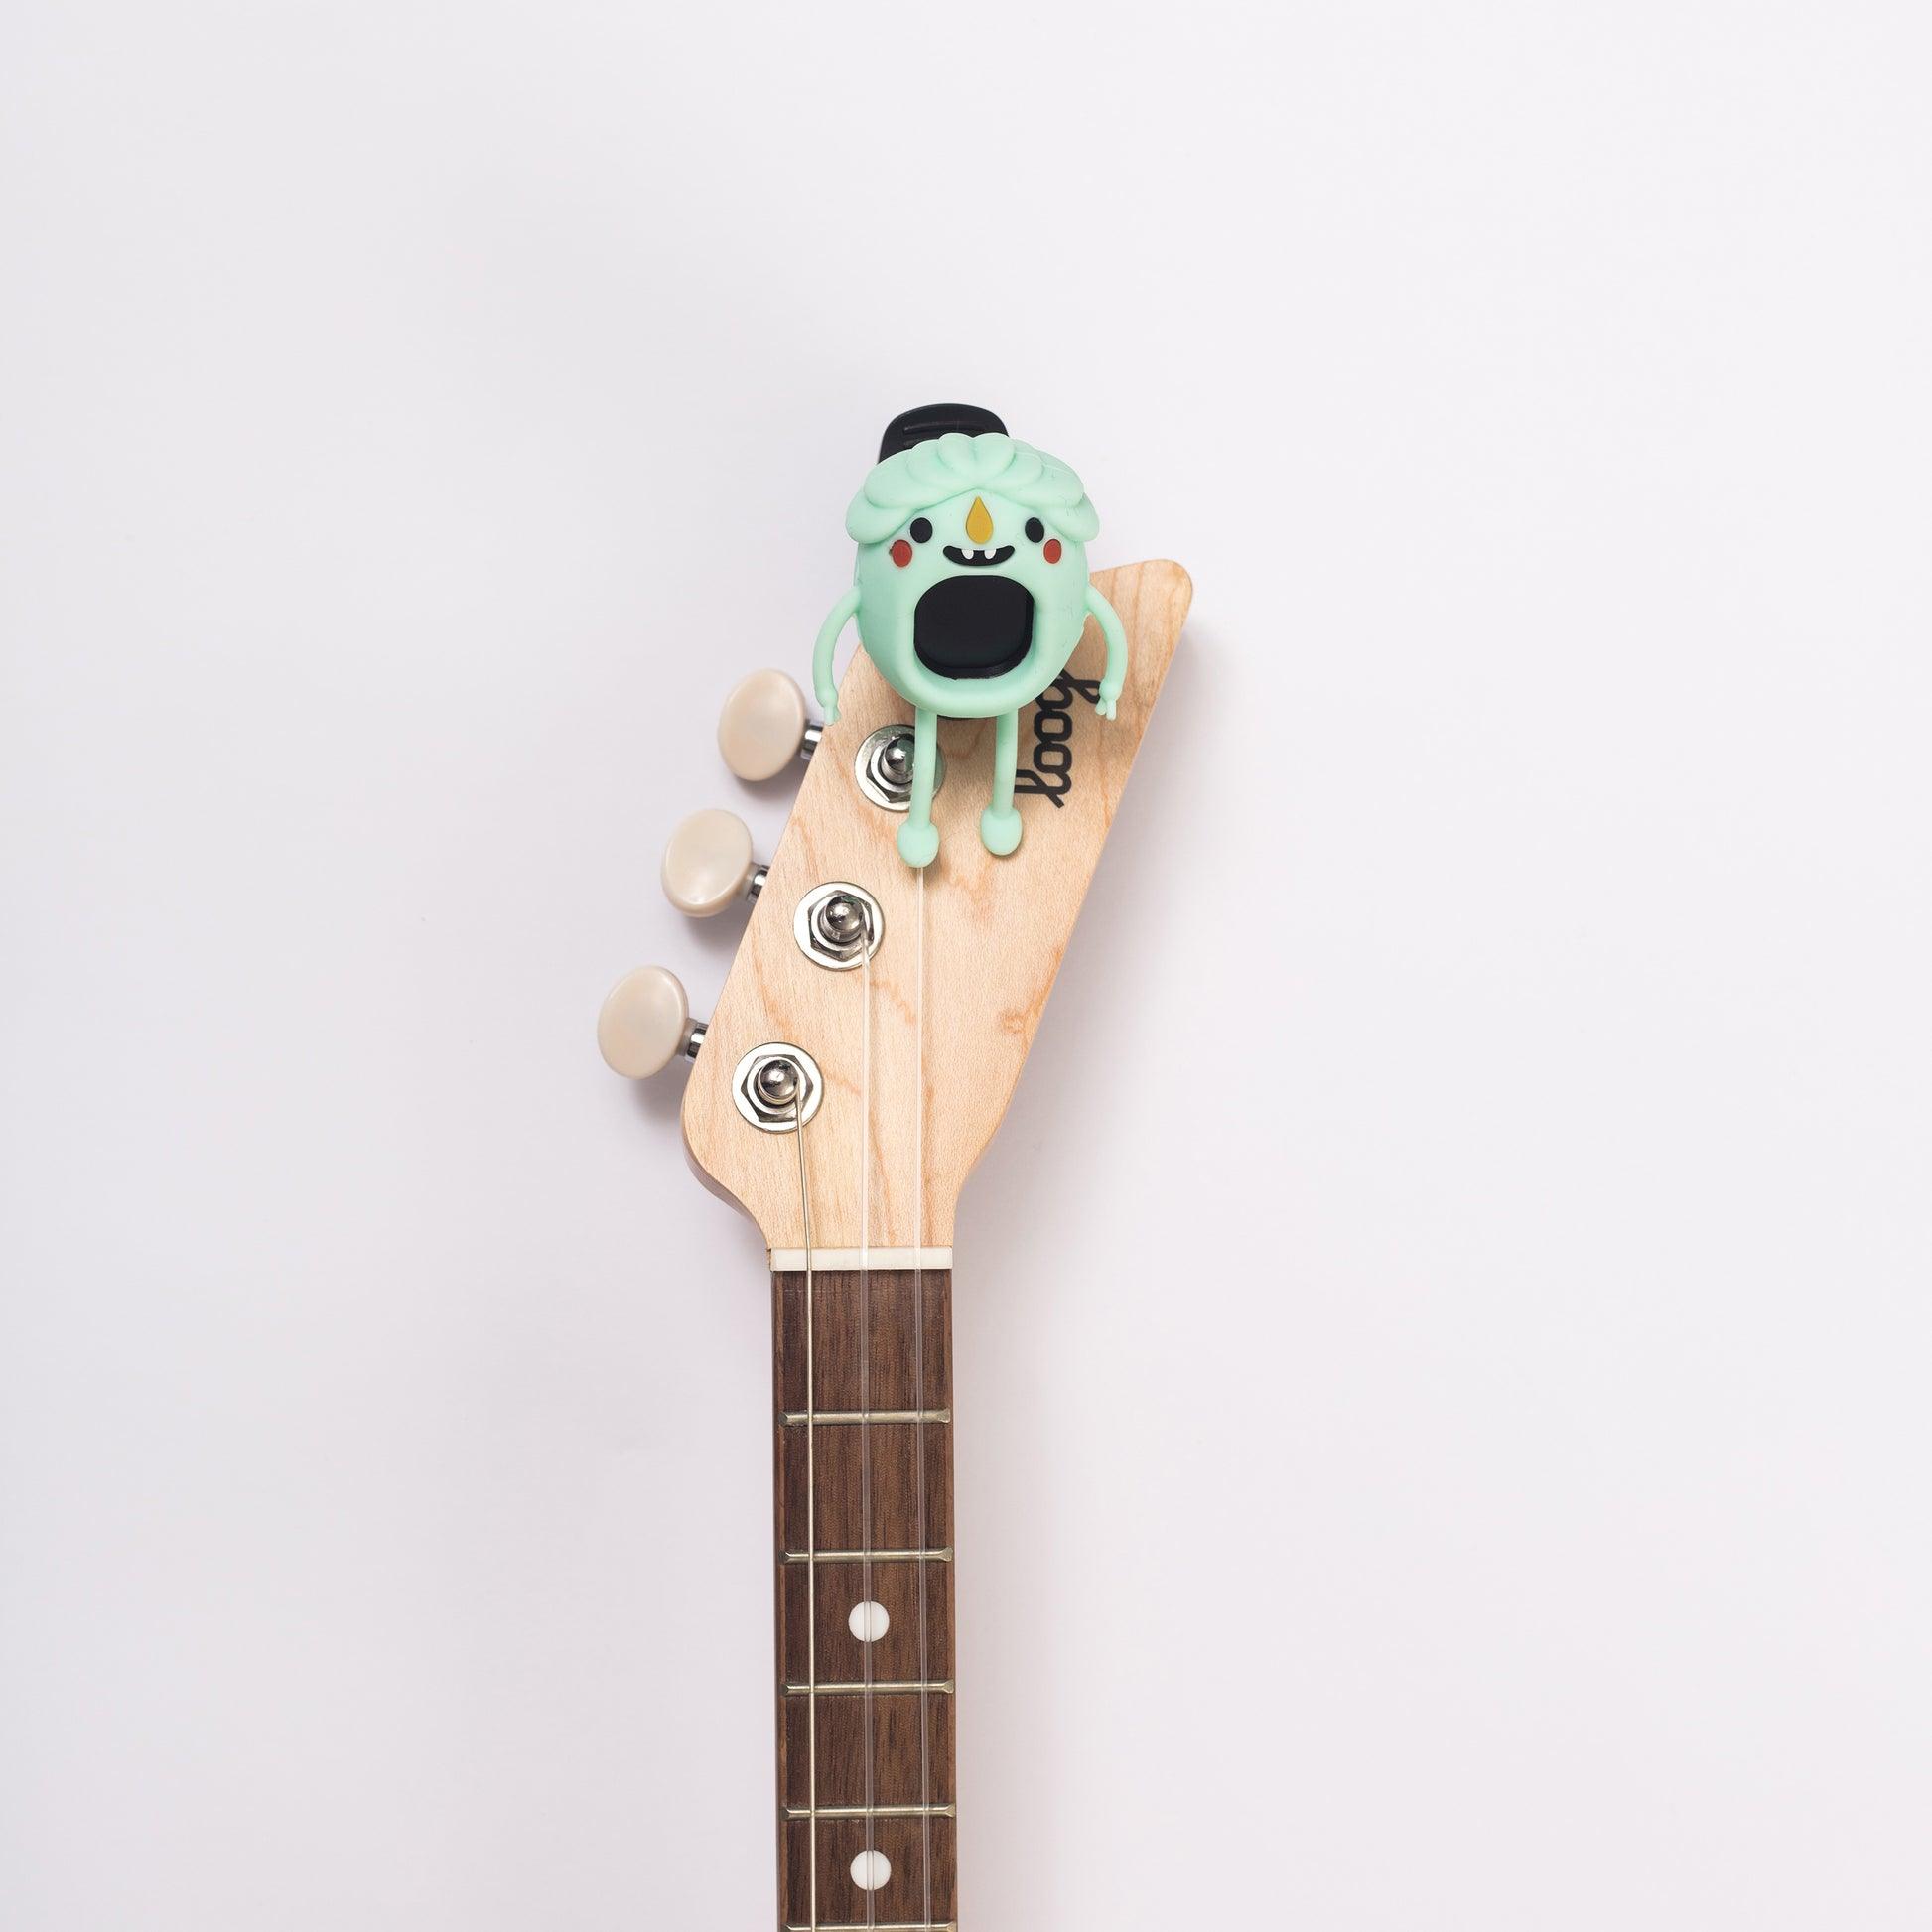 Loog Monster Tuner - Why and Whale